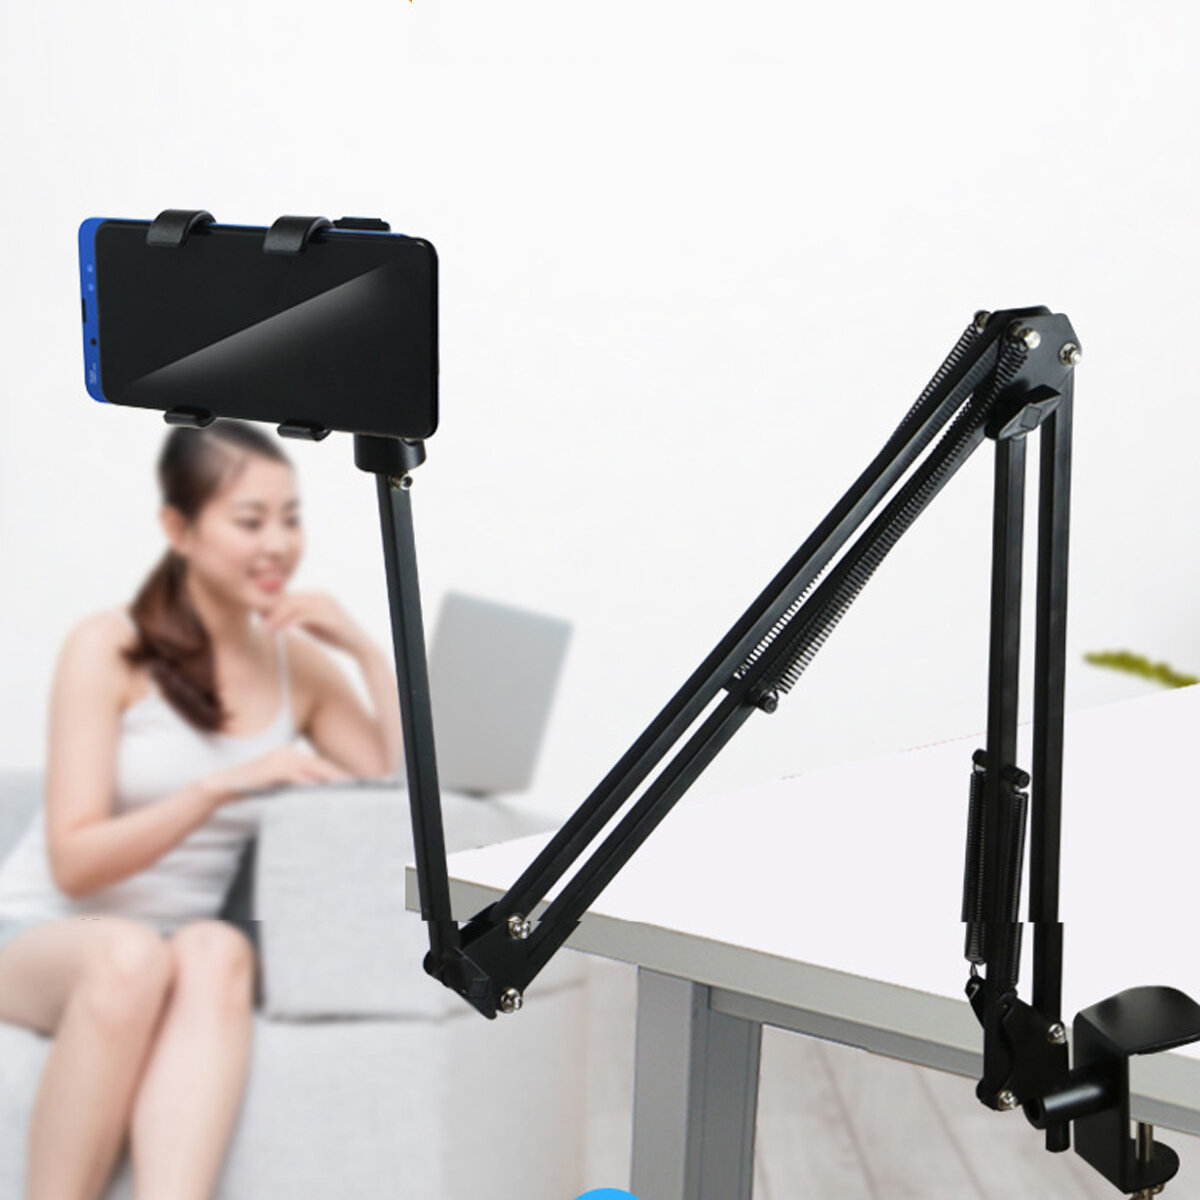 

Universal 360 Rotation Adjustable Flexible Lazy Arm Online Course Aluminum Alloy Bed Table Mobile Phone Tablet Stand for